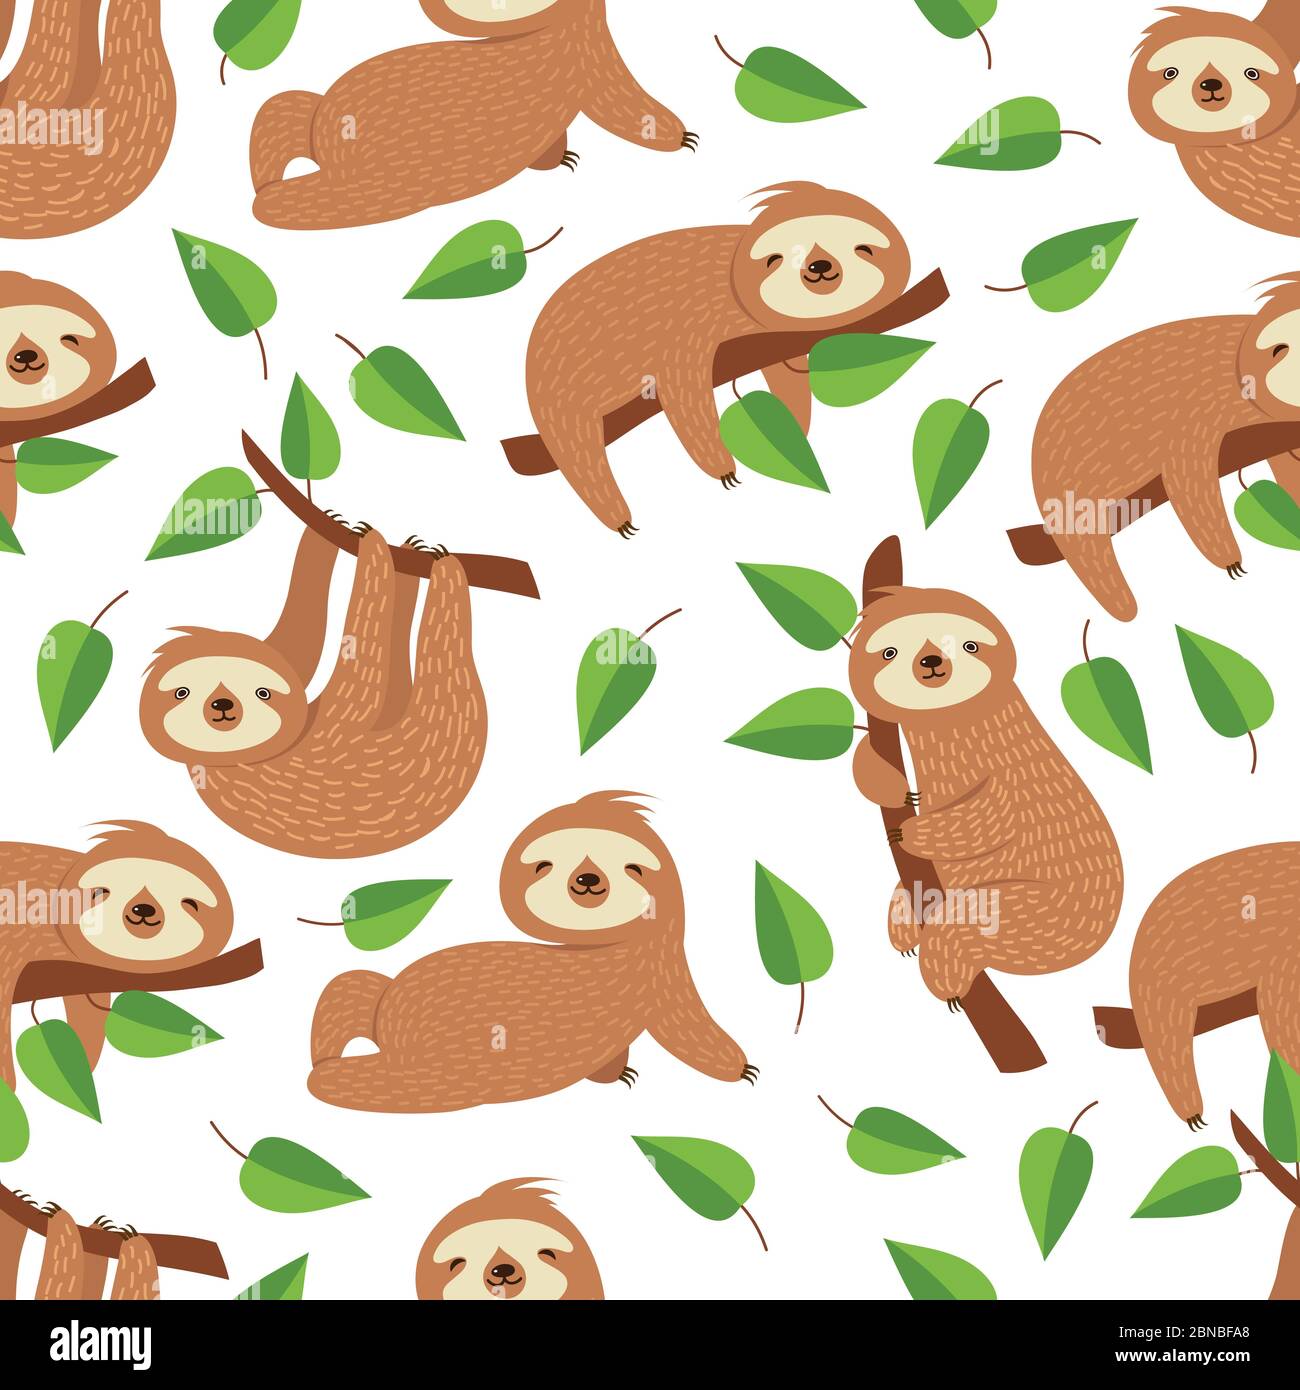 Cute baby sloth bear. Tropical bedroom vector seamless pattern. Illustration of sloth lazy endless background Stock Vector